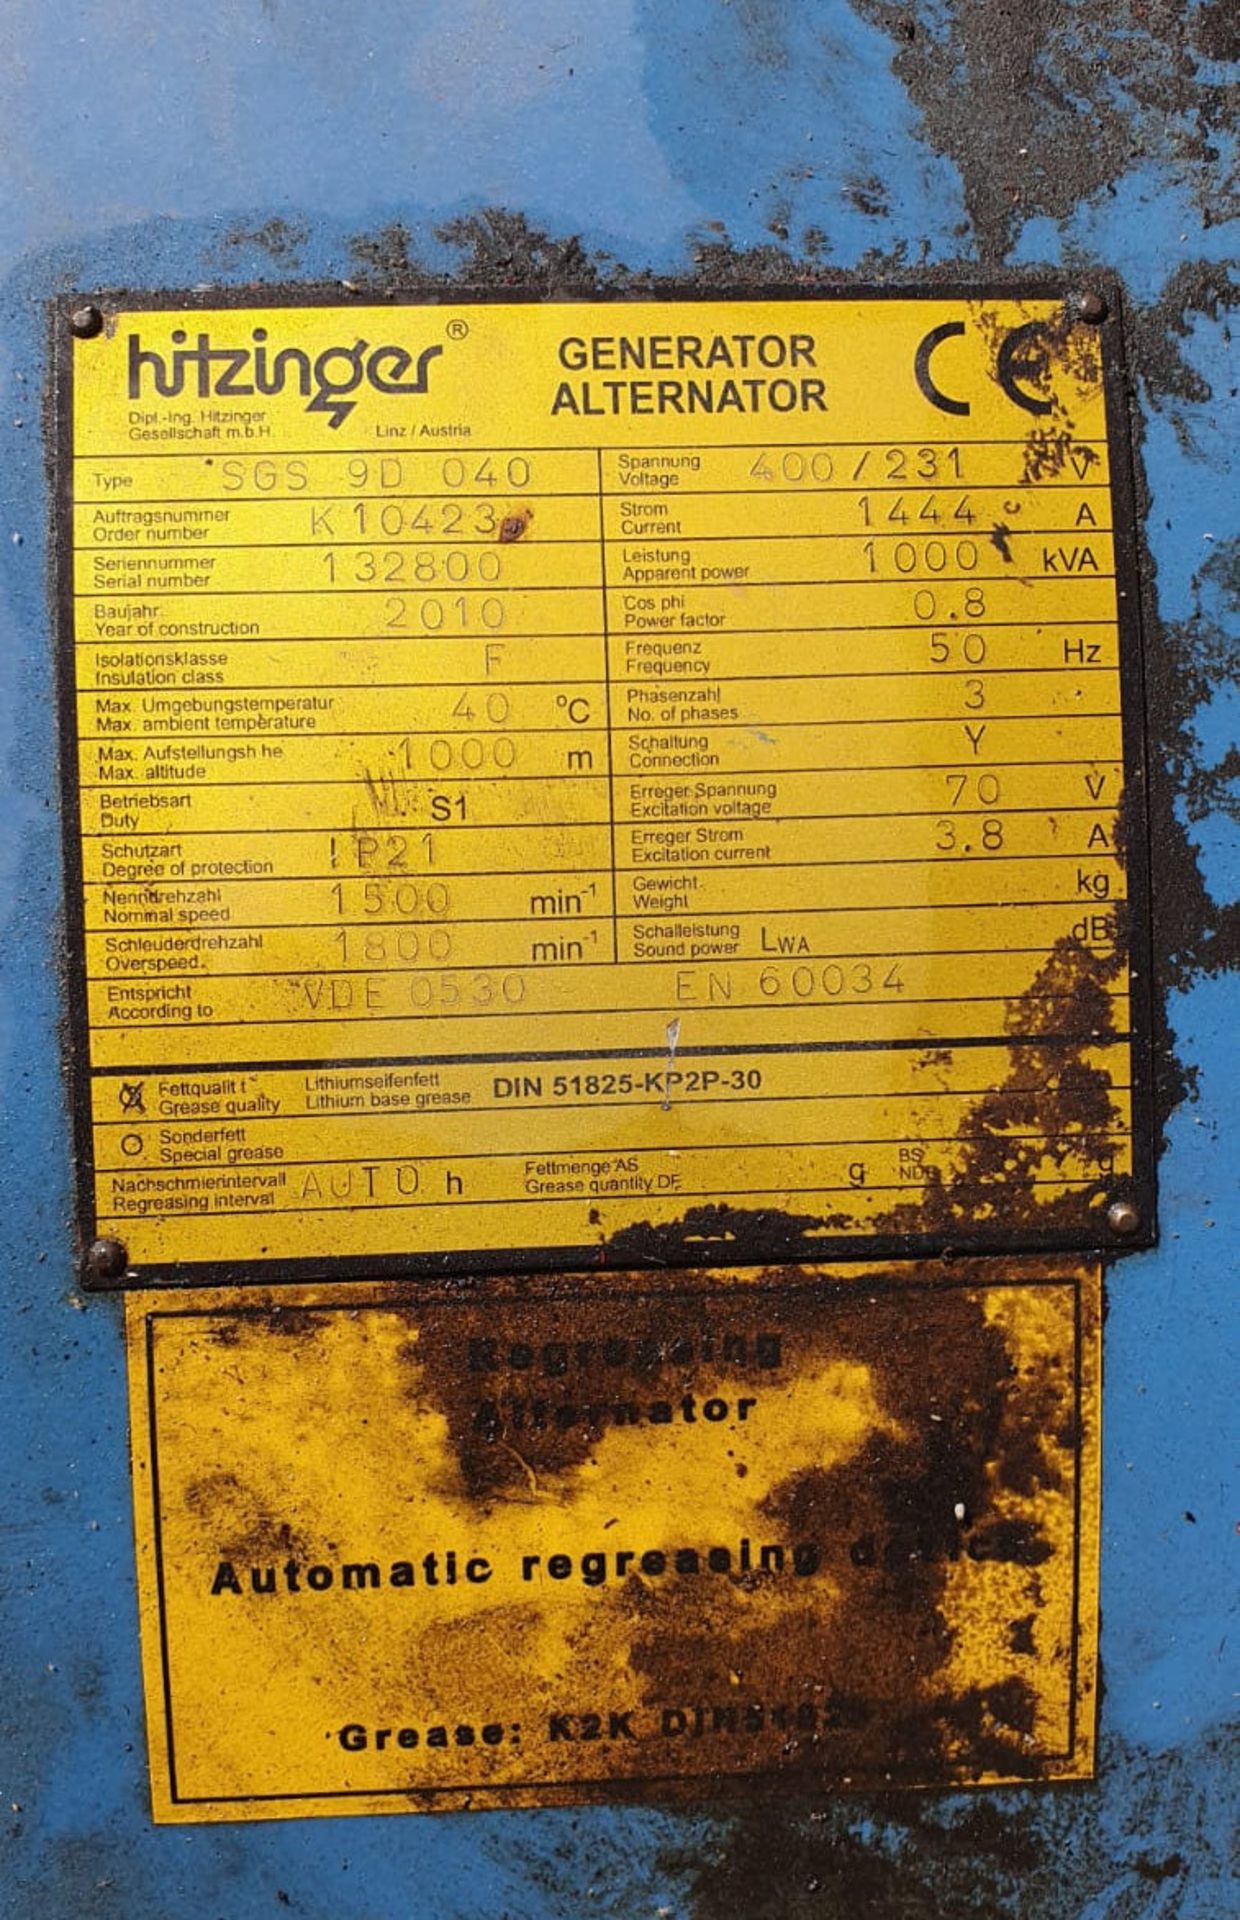 1 x 1987 Hitzinger SGS 9D 040 Generator - Only 800 Hours Use - Ref: T4UB/HZ - CL333 - Location: - Image 19 of 20